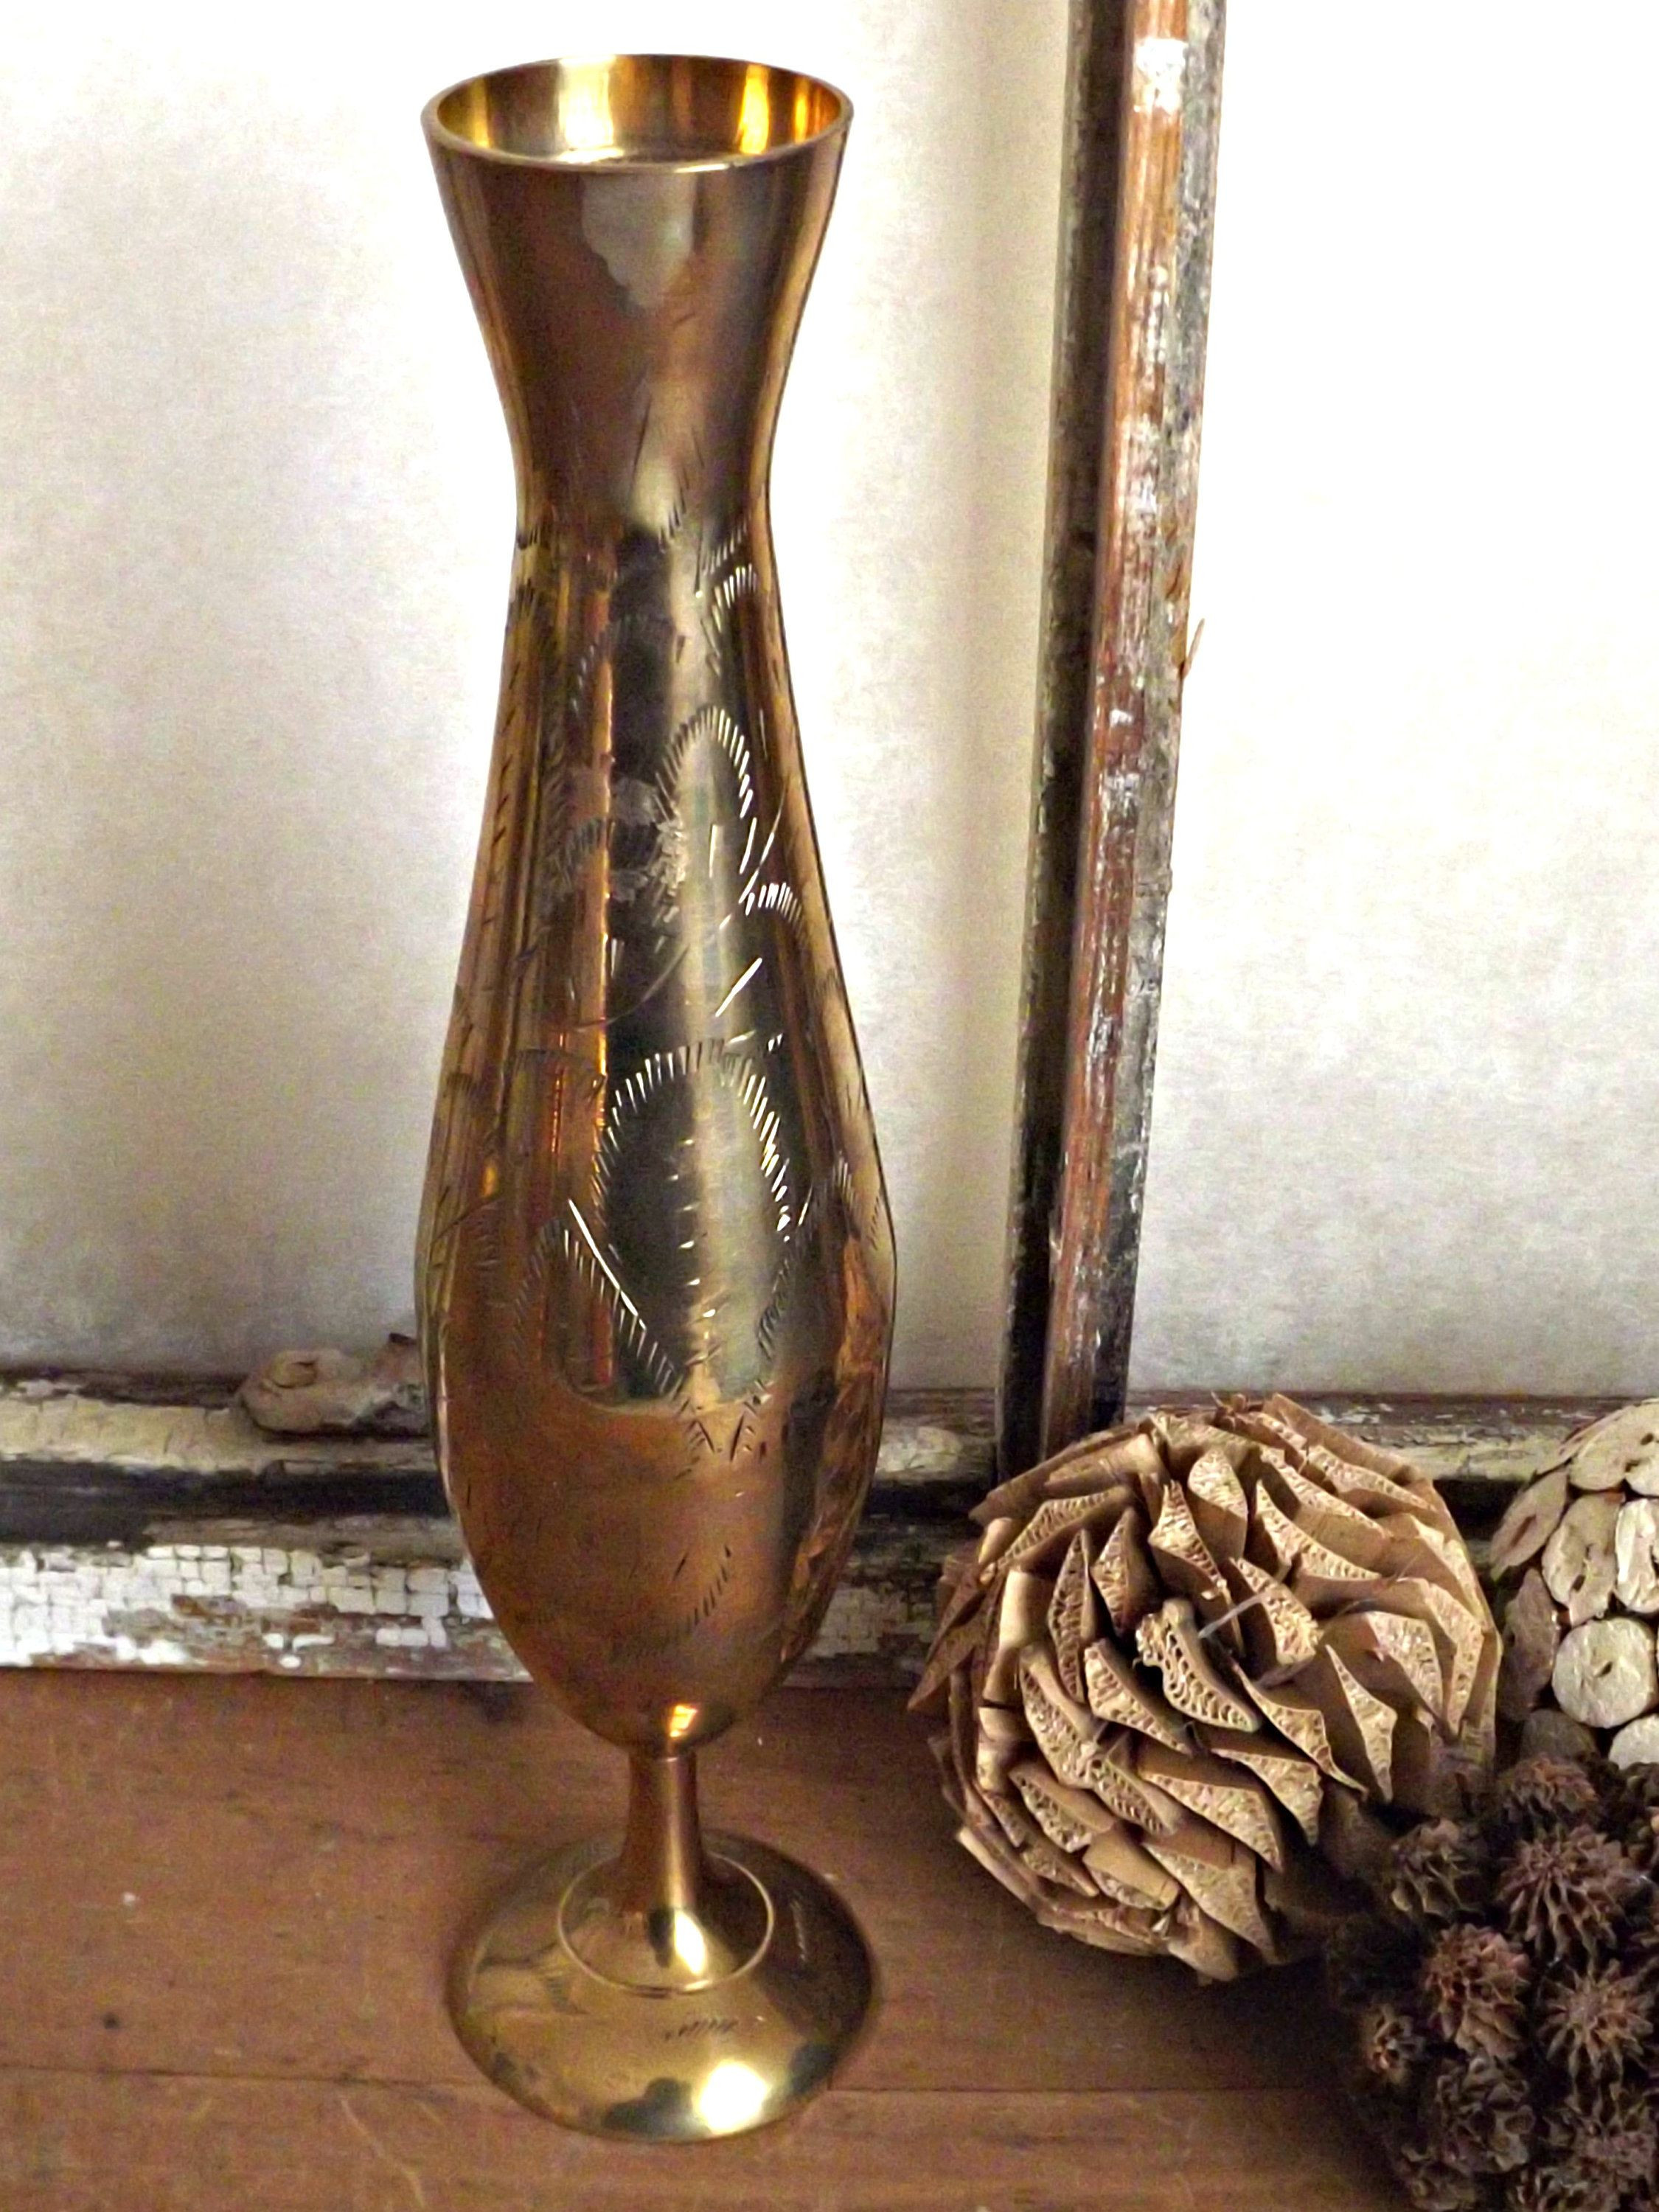 20 Cute Antique Brass Vase Made In India 2023 free download antique brass vase made in india of solid brass vase boho decor etched brass vase retro brass decor regarding solid brass vase boho decor etched brass vase retro bass decor vintage